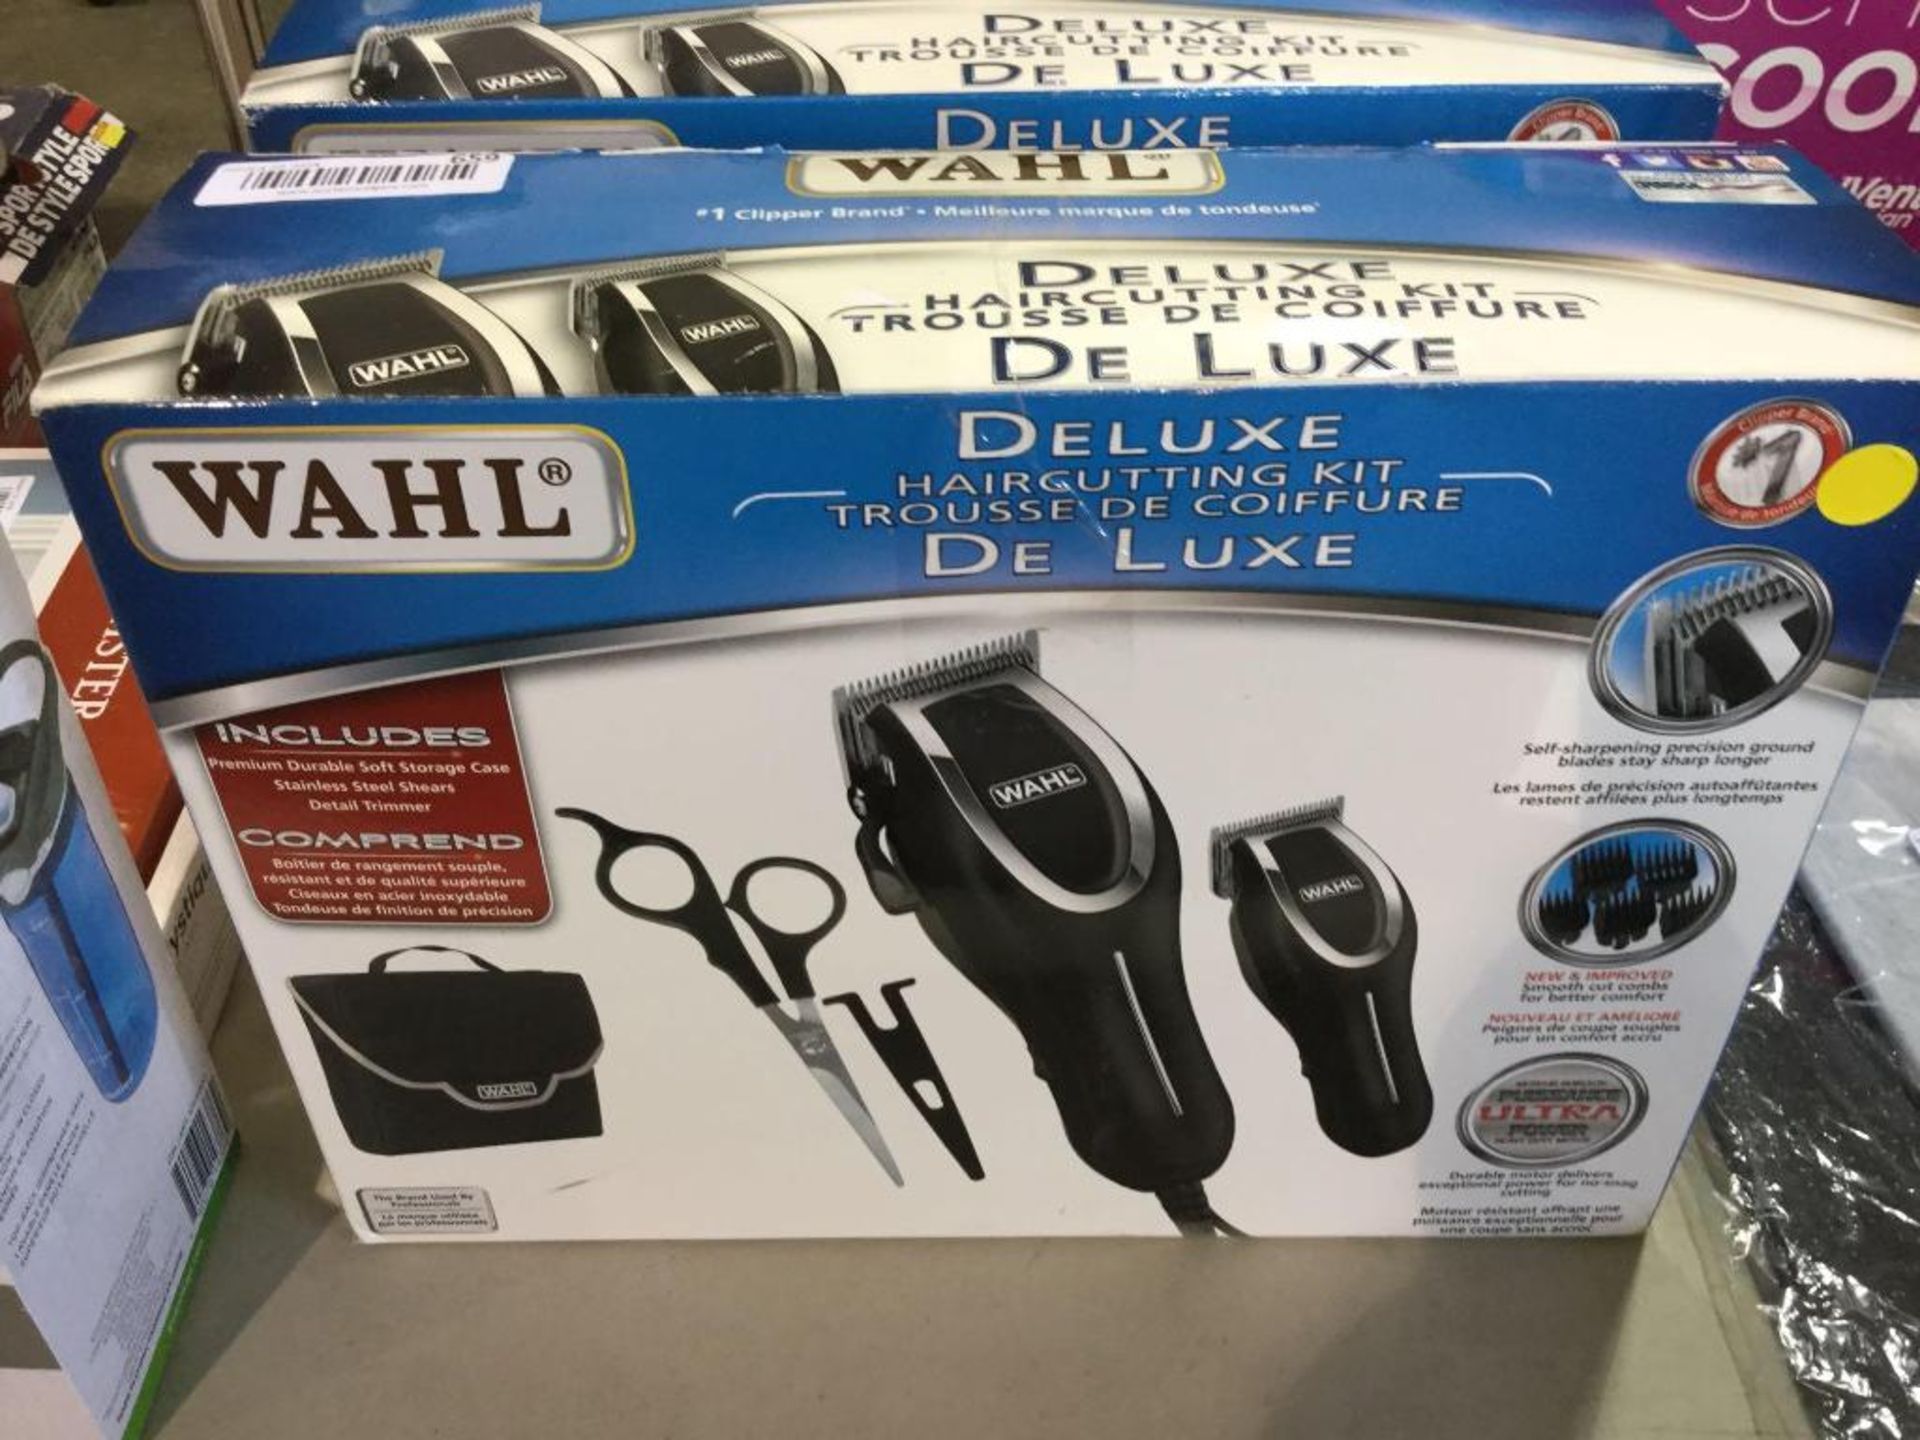 Wahl Deluxe Trimmer Kit